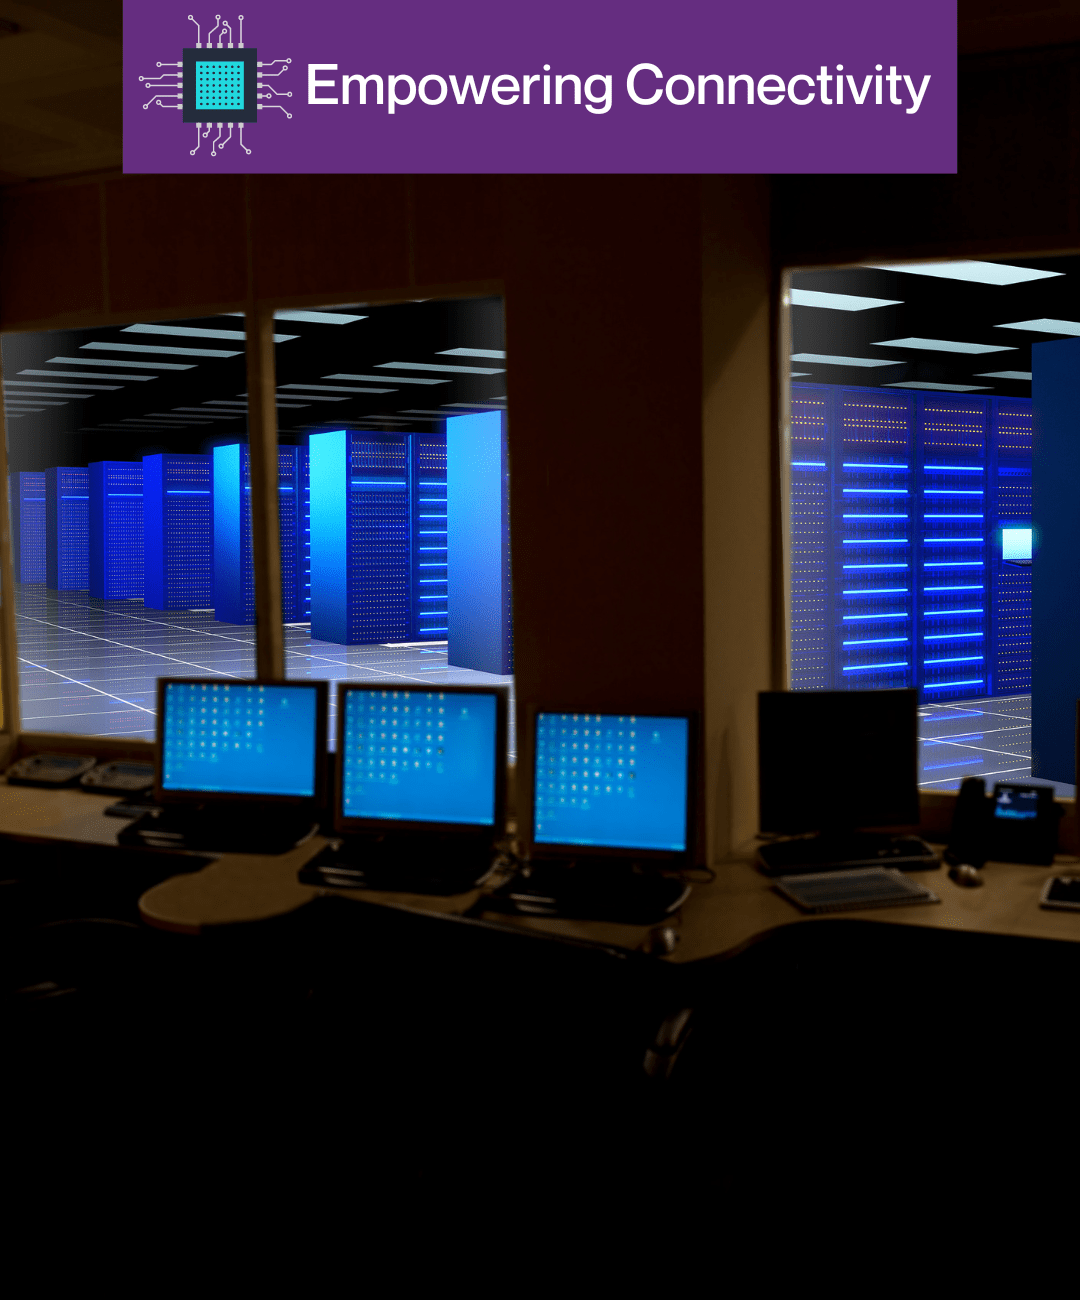 Network servers and workstations in a corporate IT environment, representing BDR Group's robust IT Hardware Solutions.